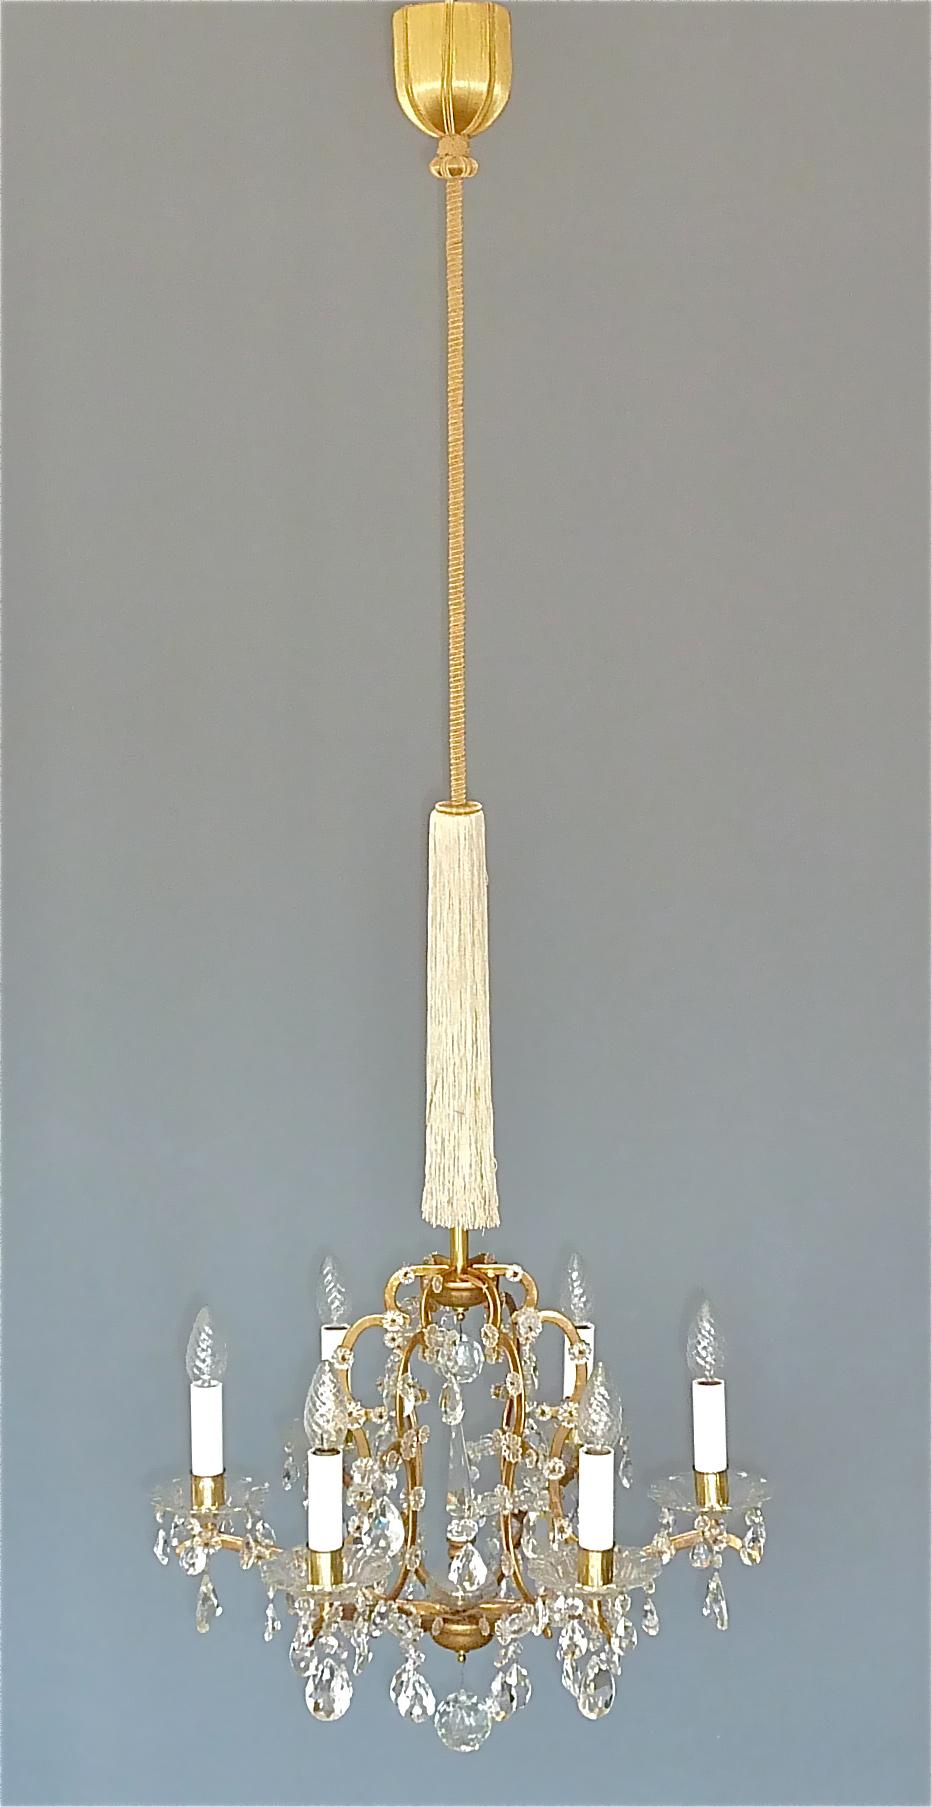 Lobmeyr Maria Theresia Style Chandelier 1950s Gilt Brass Faceted Crystal Glass For Sale 7